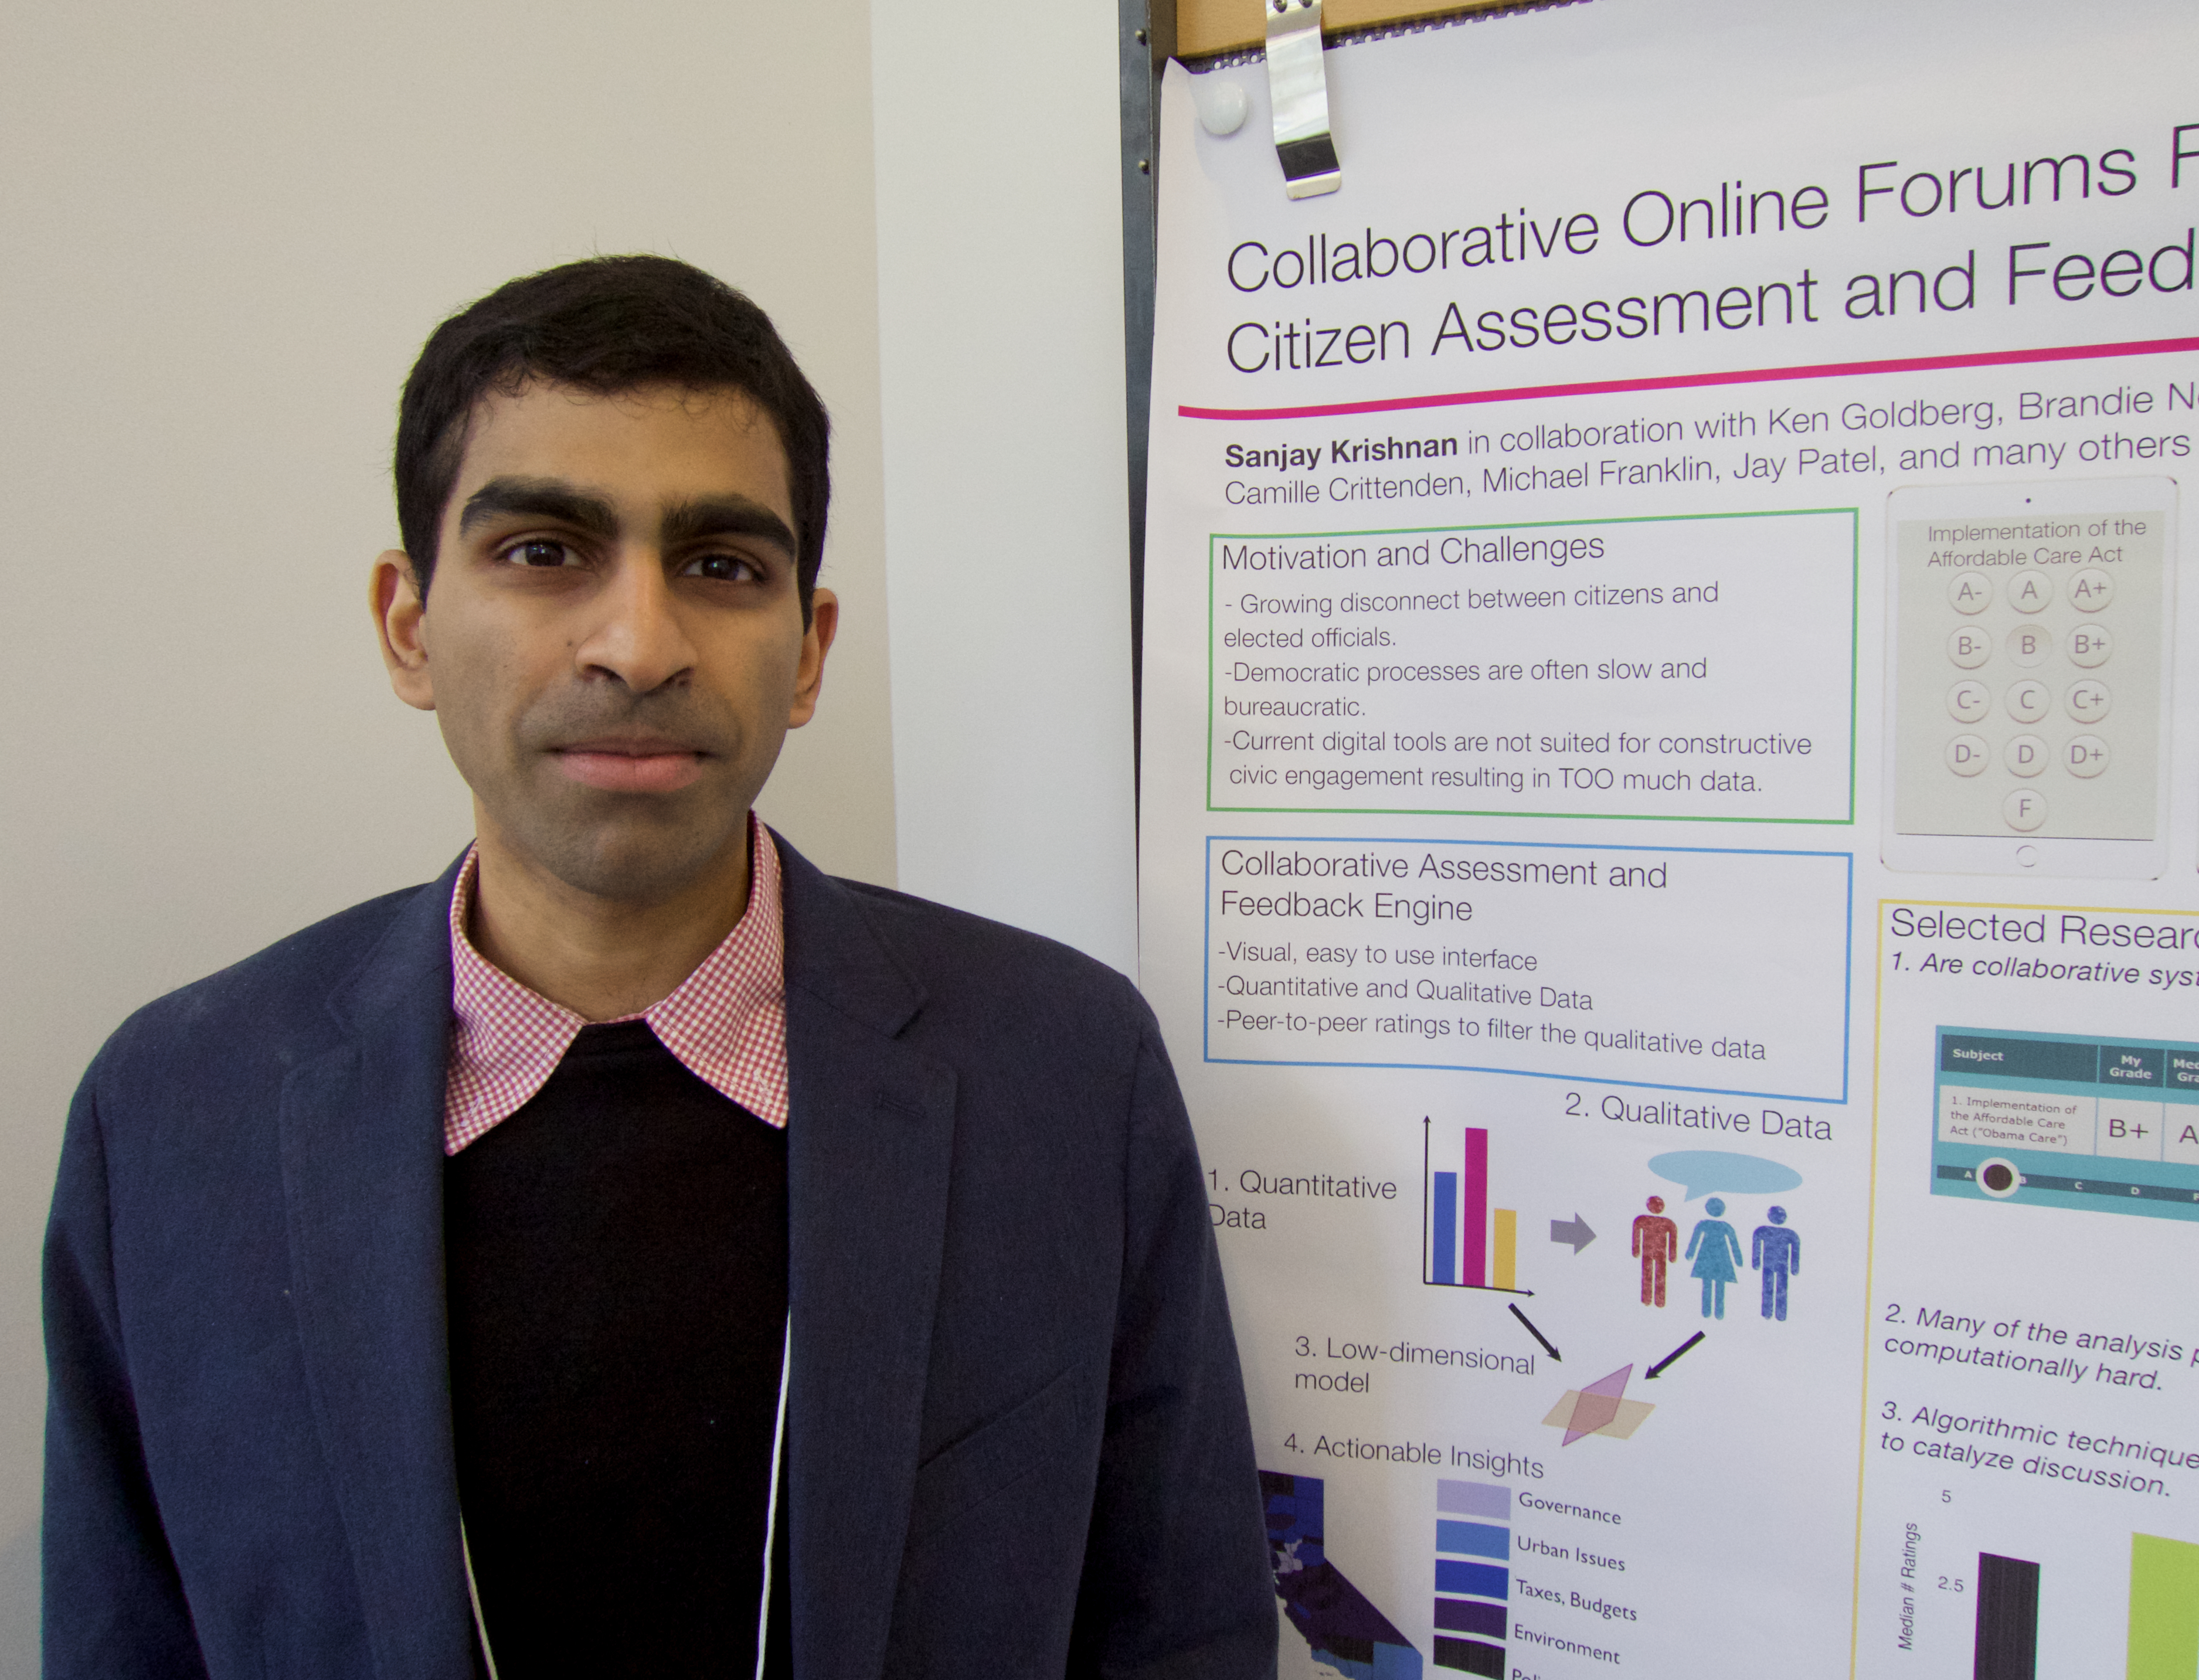 Sage Scholar Sanjay Krishnan, from the University of California at Berkeley, is shown with his poster at the Paris Sage Assembly, April 16, 2015.